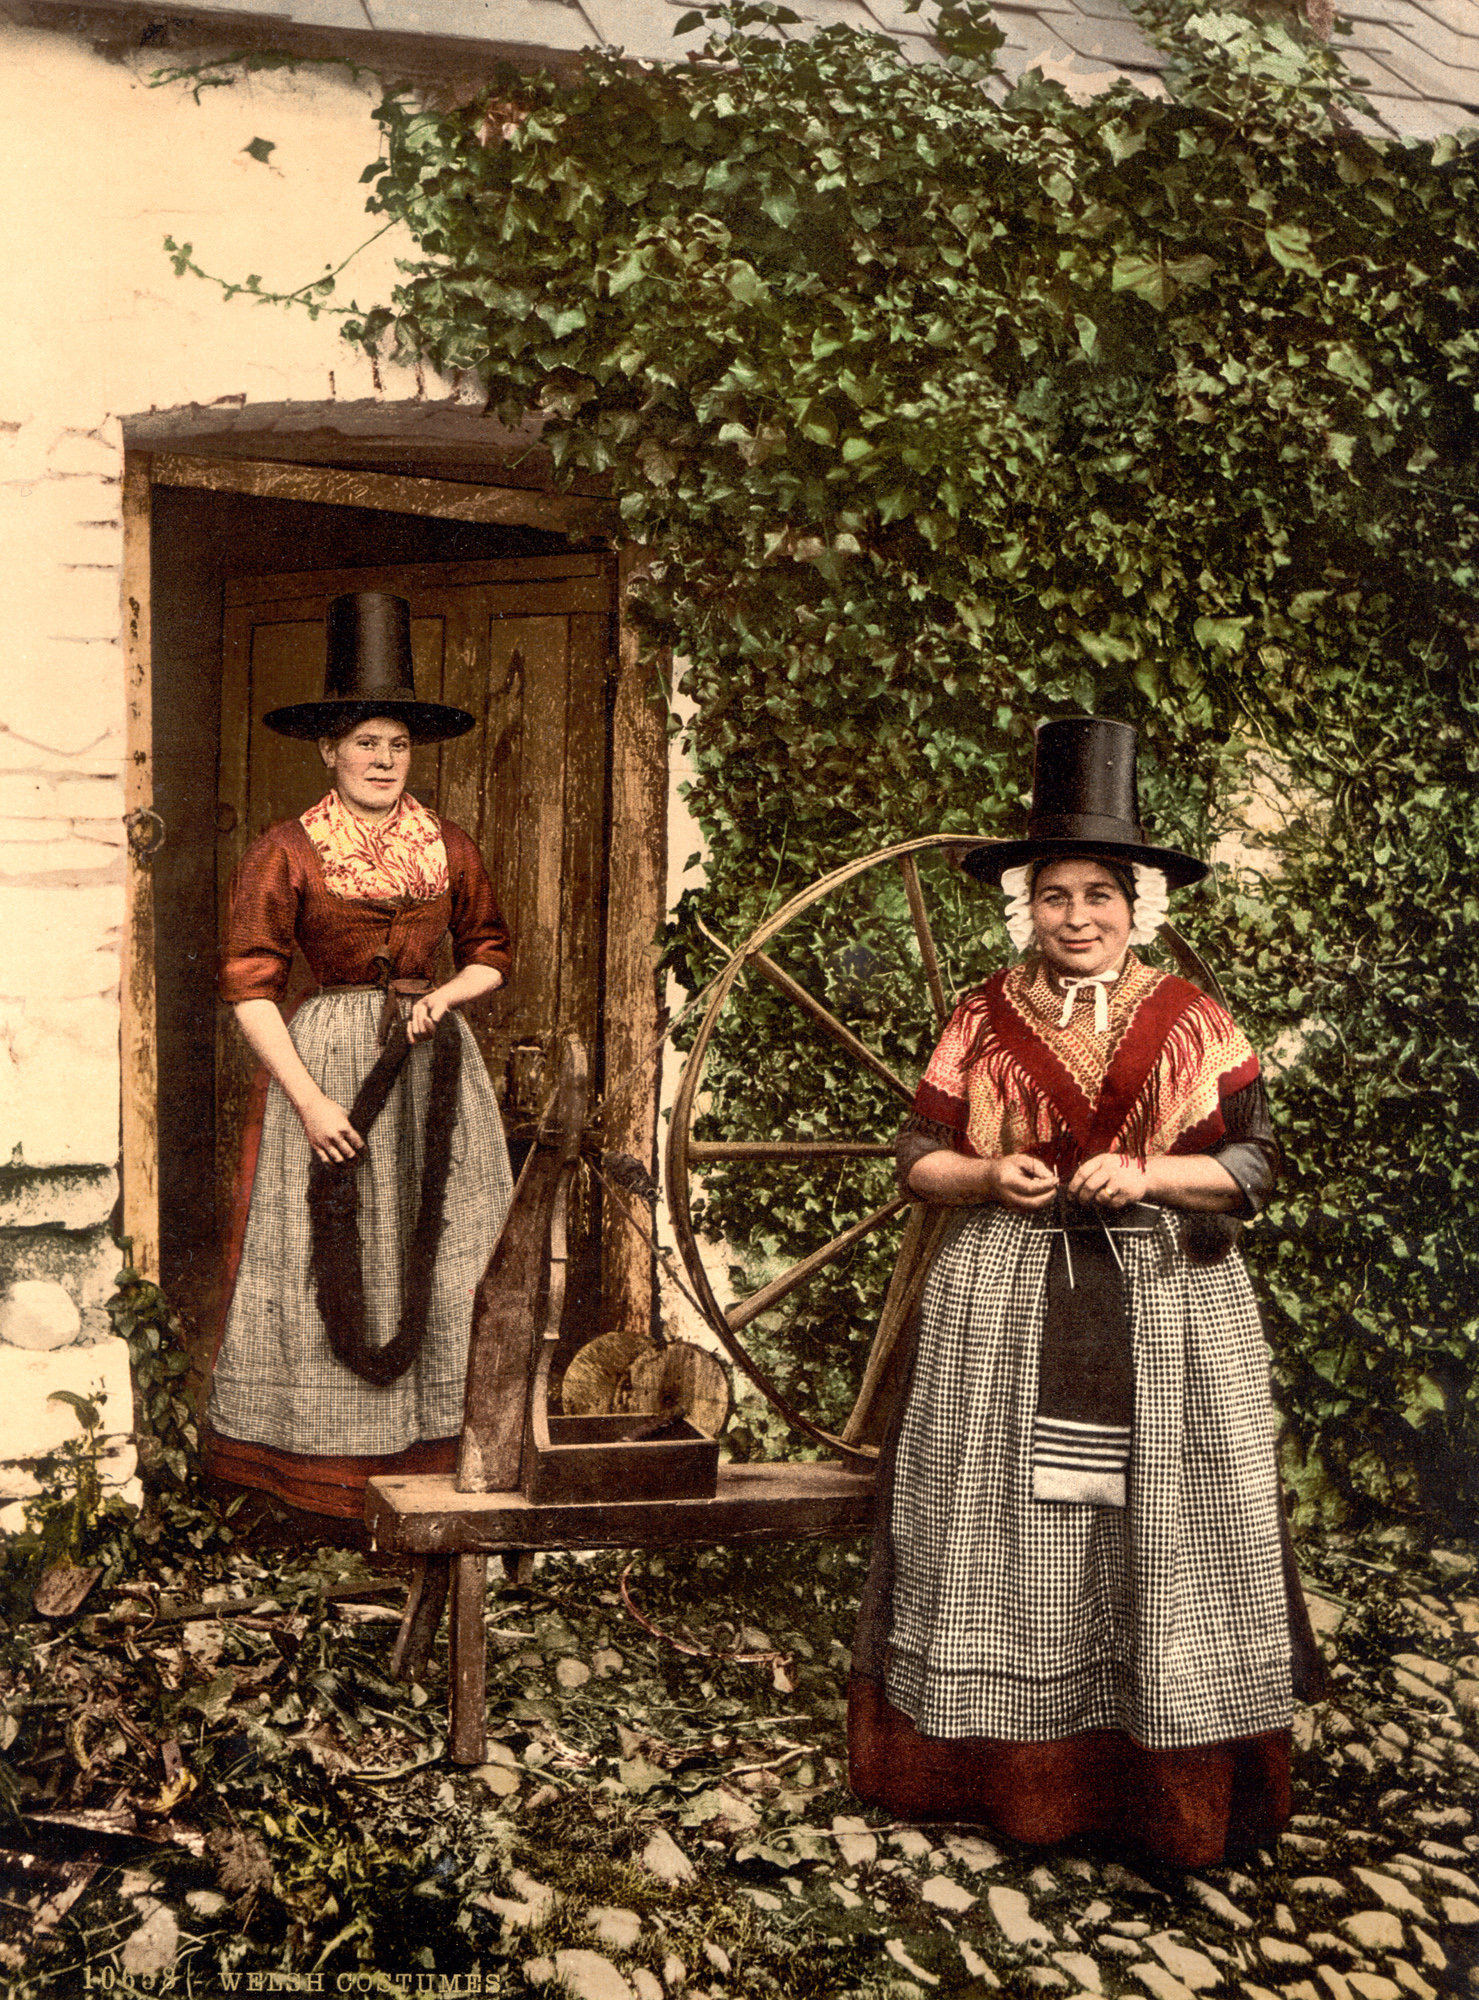 Welsh spinners and spinning wheel, Wales, photochrom, ca 1890-1900